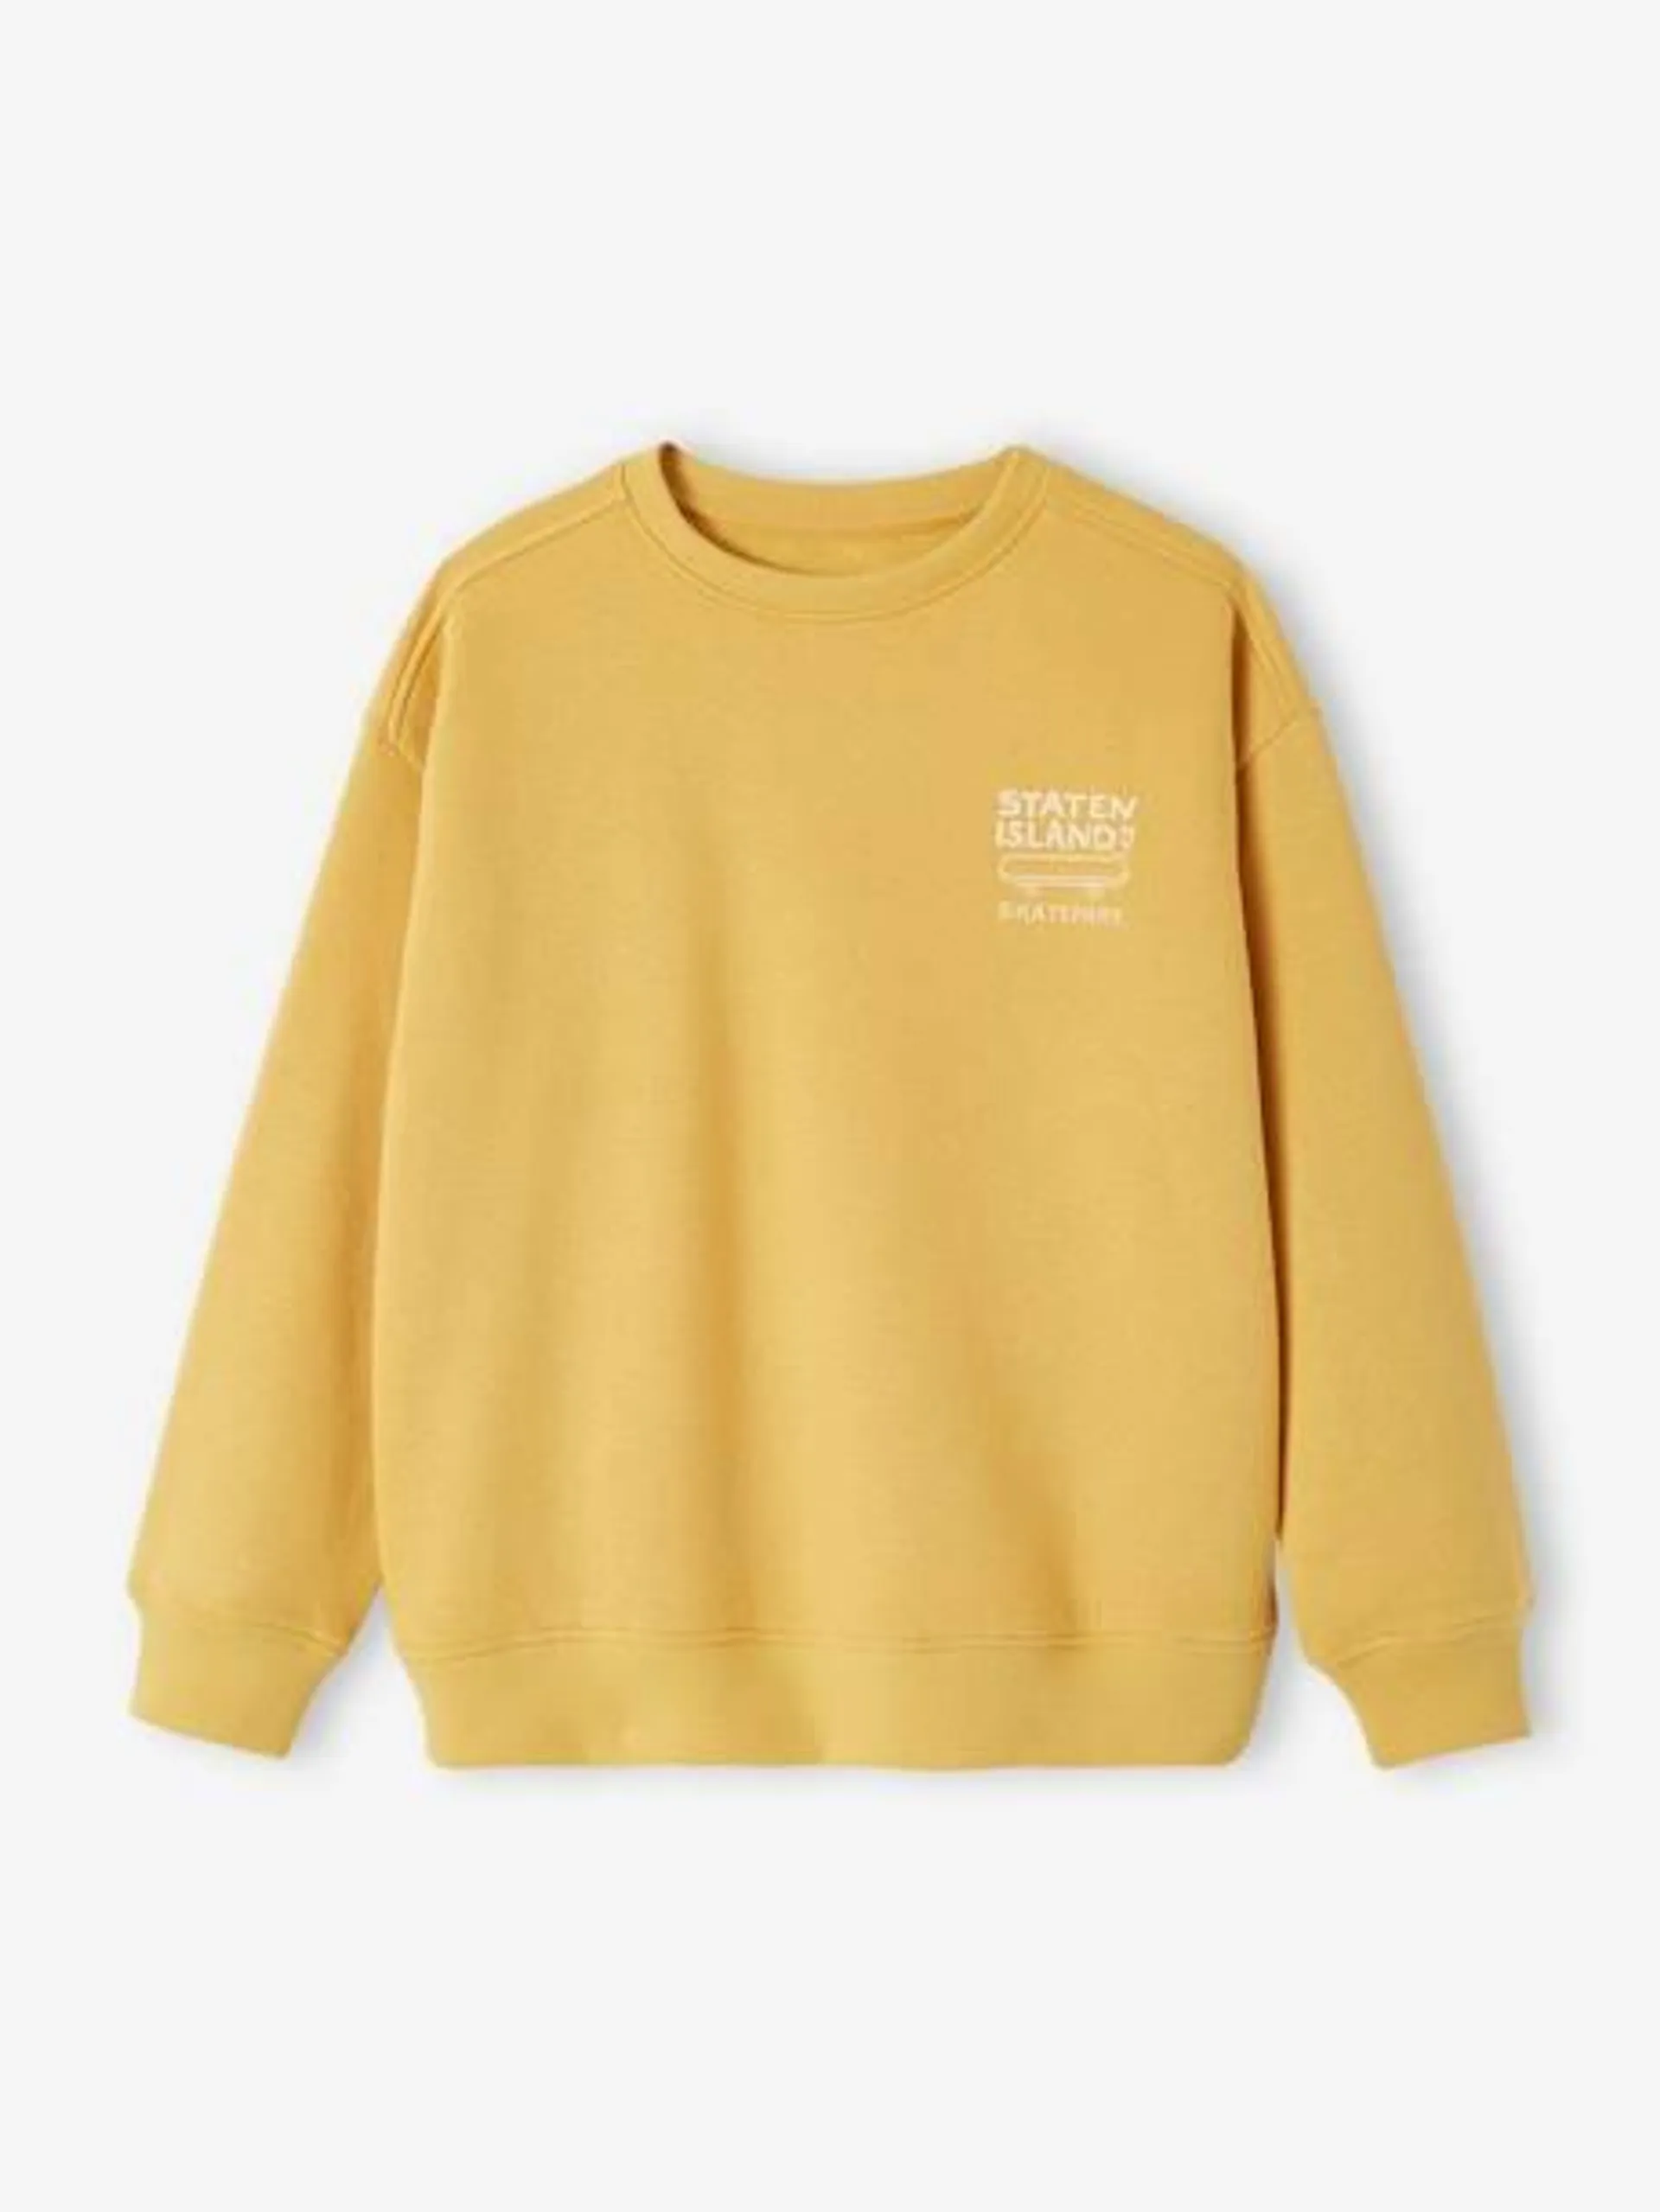 Sweatshirt with Chest Motif for Boys